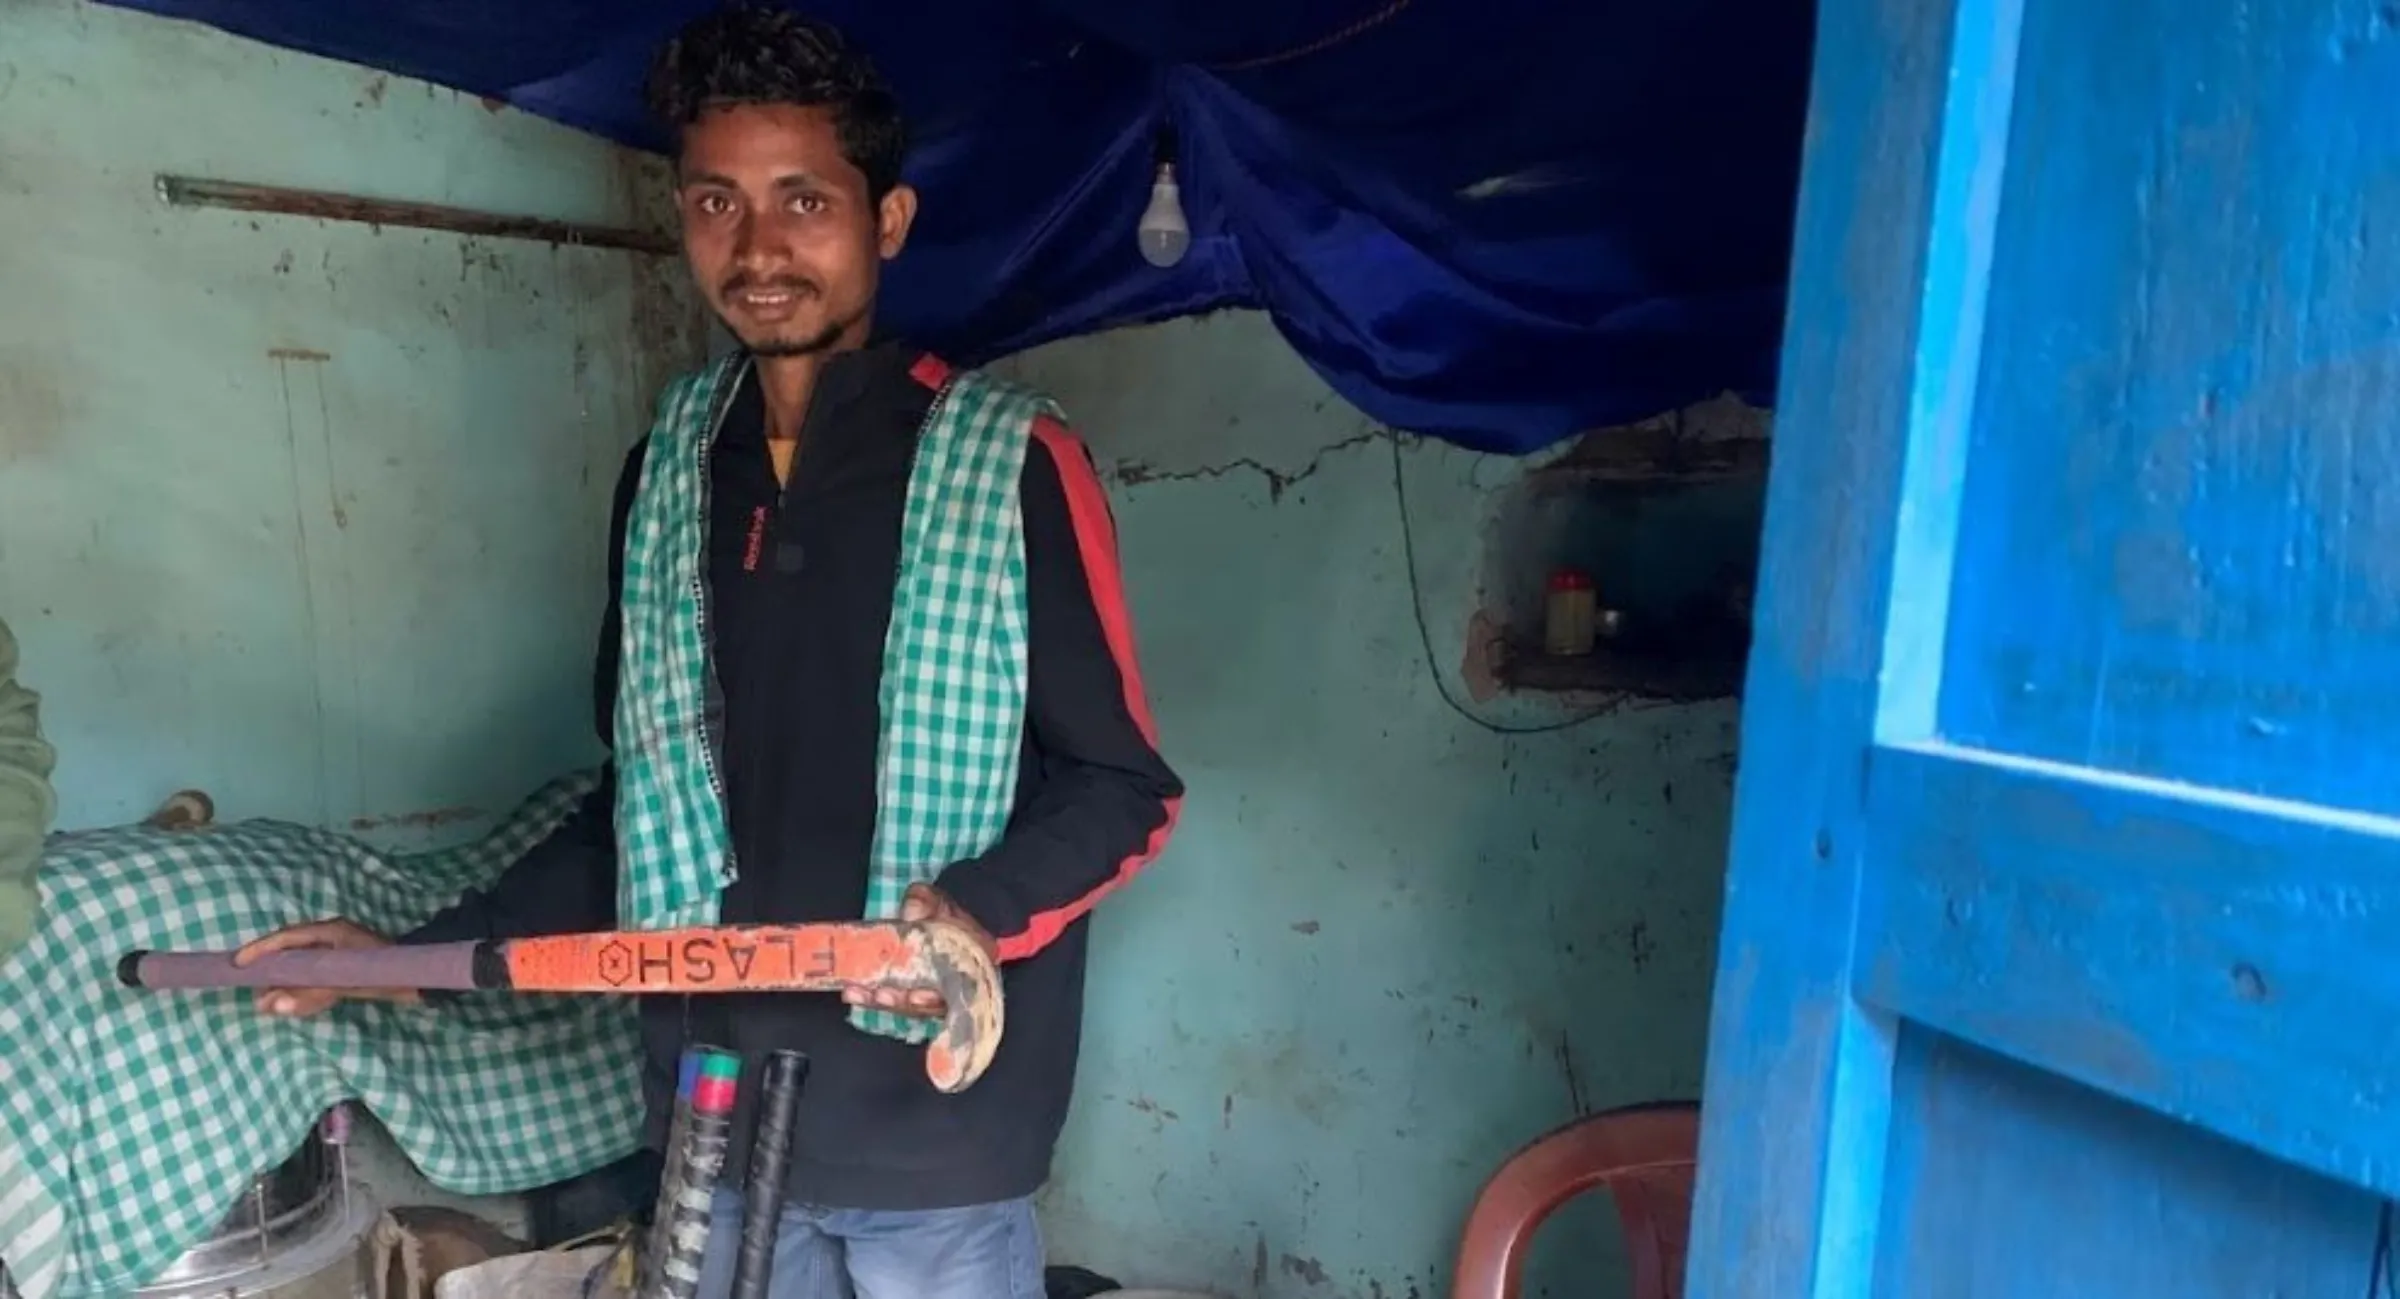 Bimal Ashok Minj poses with a hockey stick in Sumura village in Odisha state, December 10, 2022